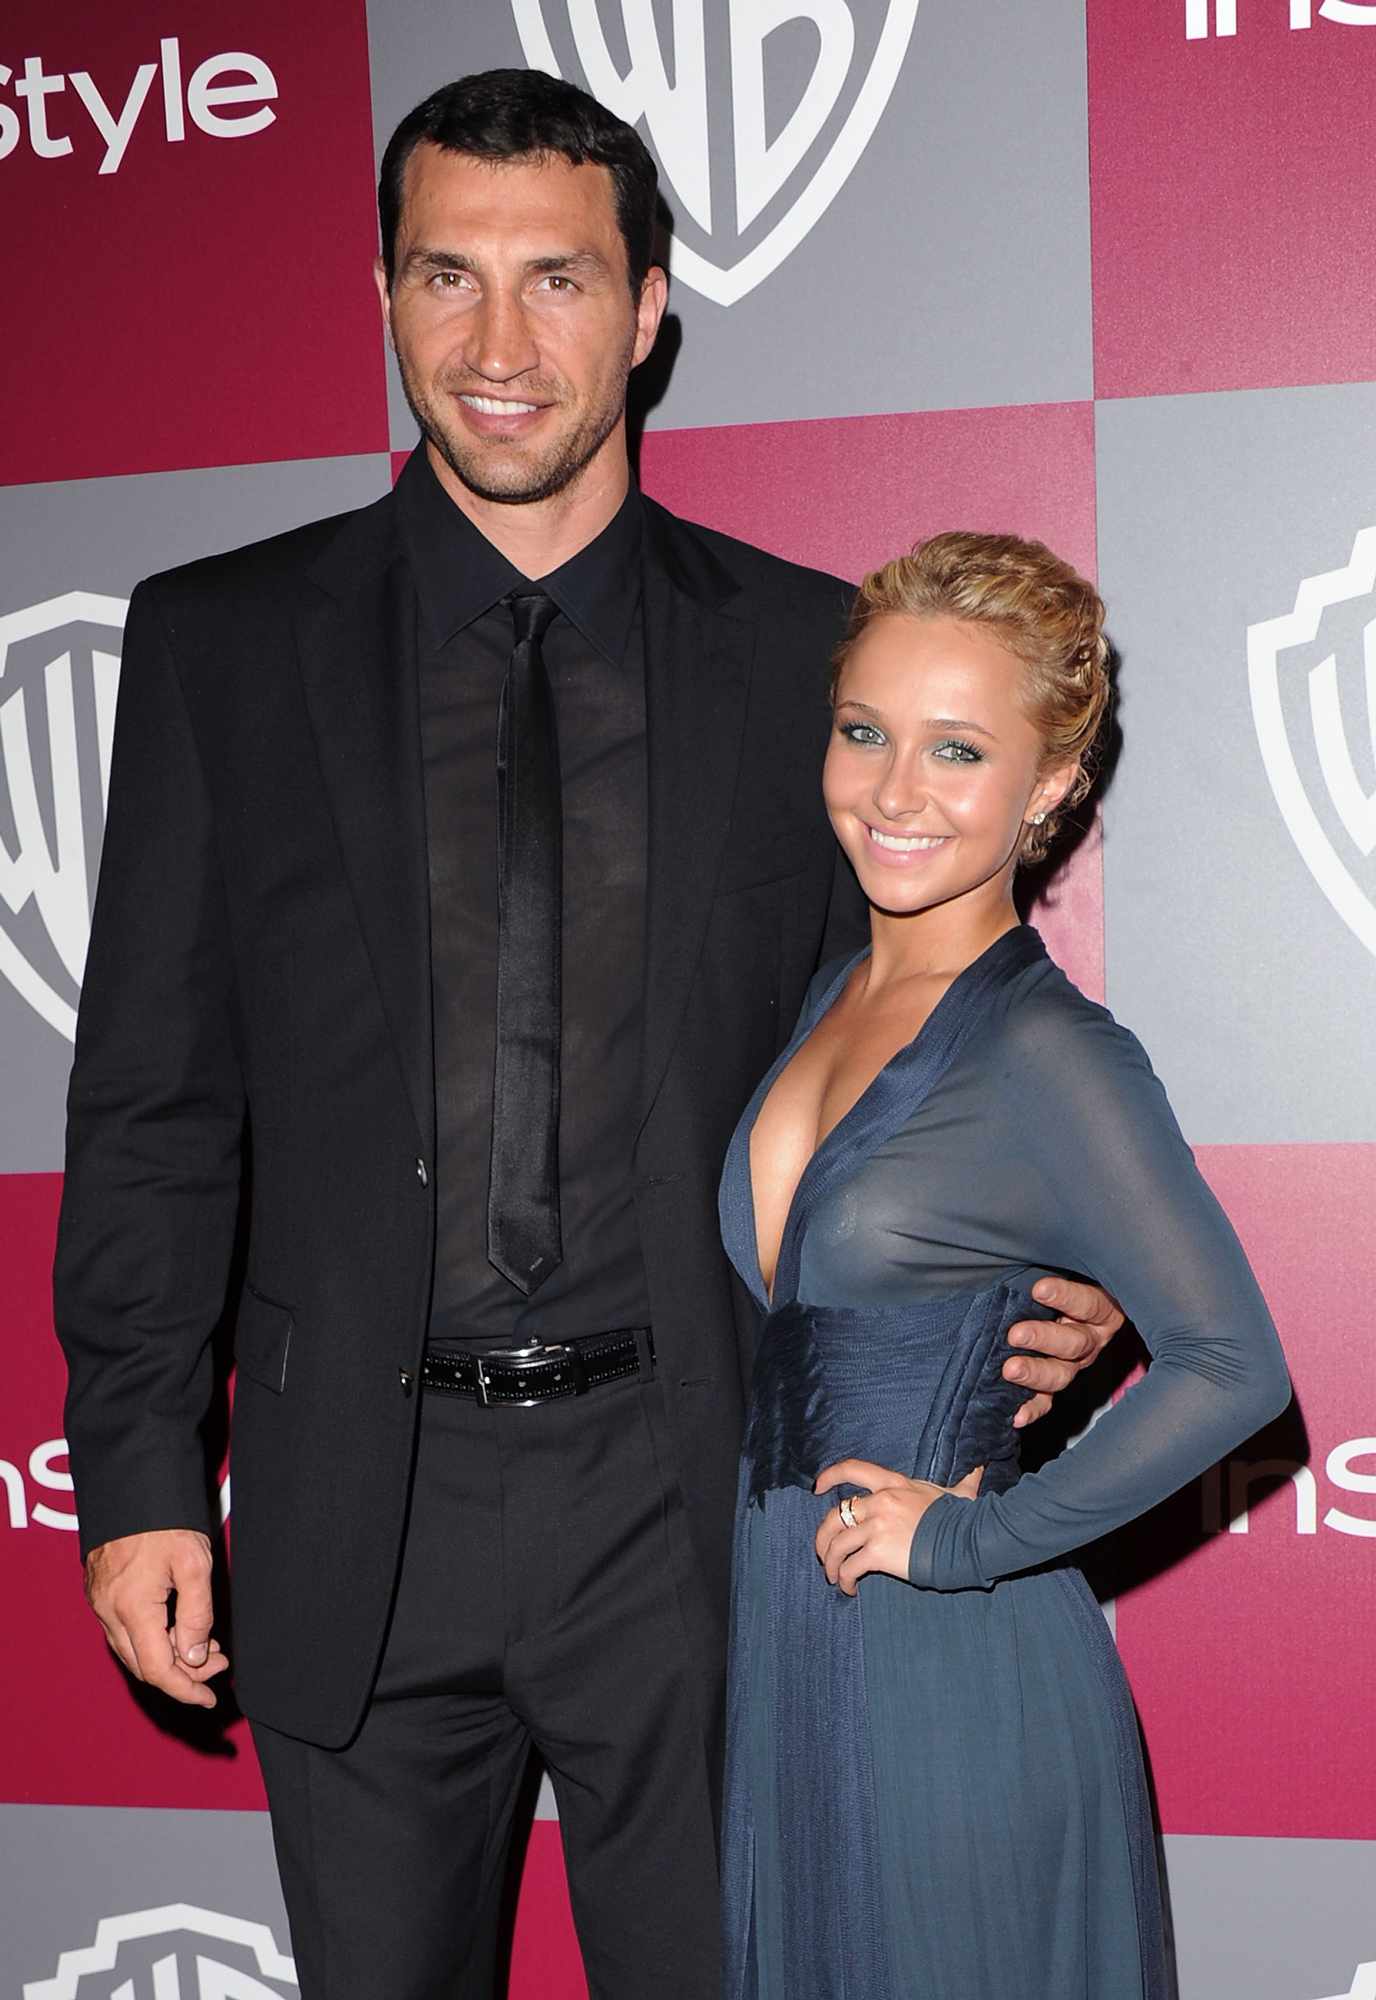 Hayden Panettiere (R) and professional boxer Wladimir Klitschko arrive at the 2011 InStyle/Warner Brothers Golden Globes Party at The Beverly Hilton hotel on January 15, 2011 in Beverly Hills, California